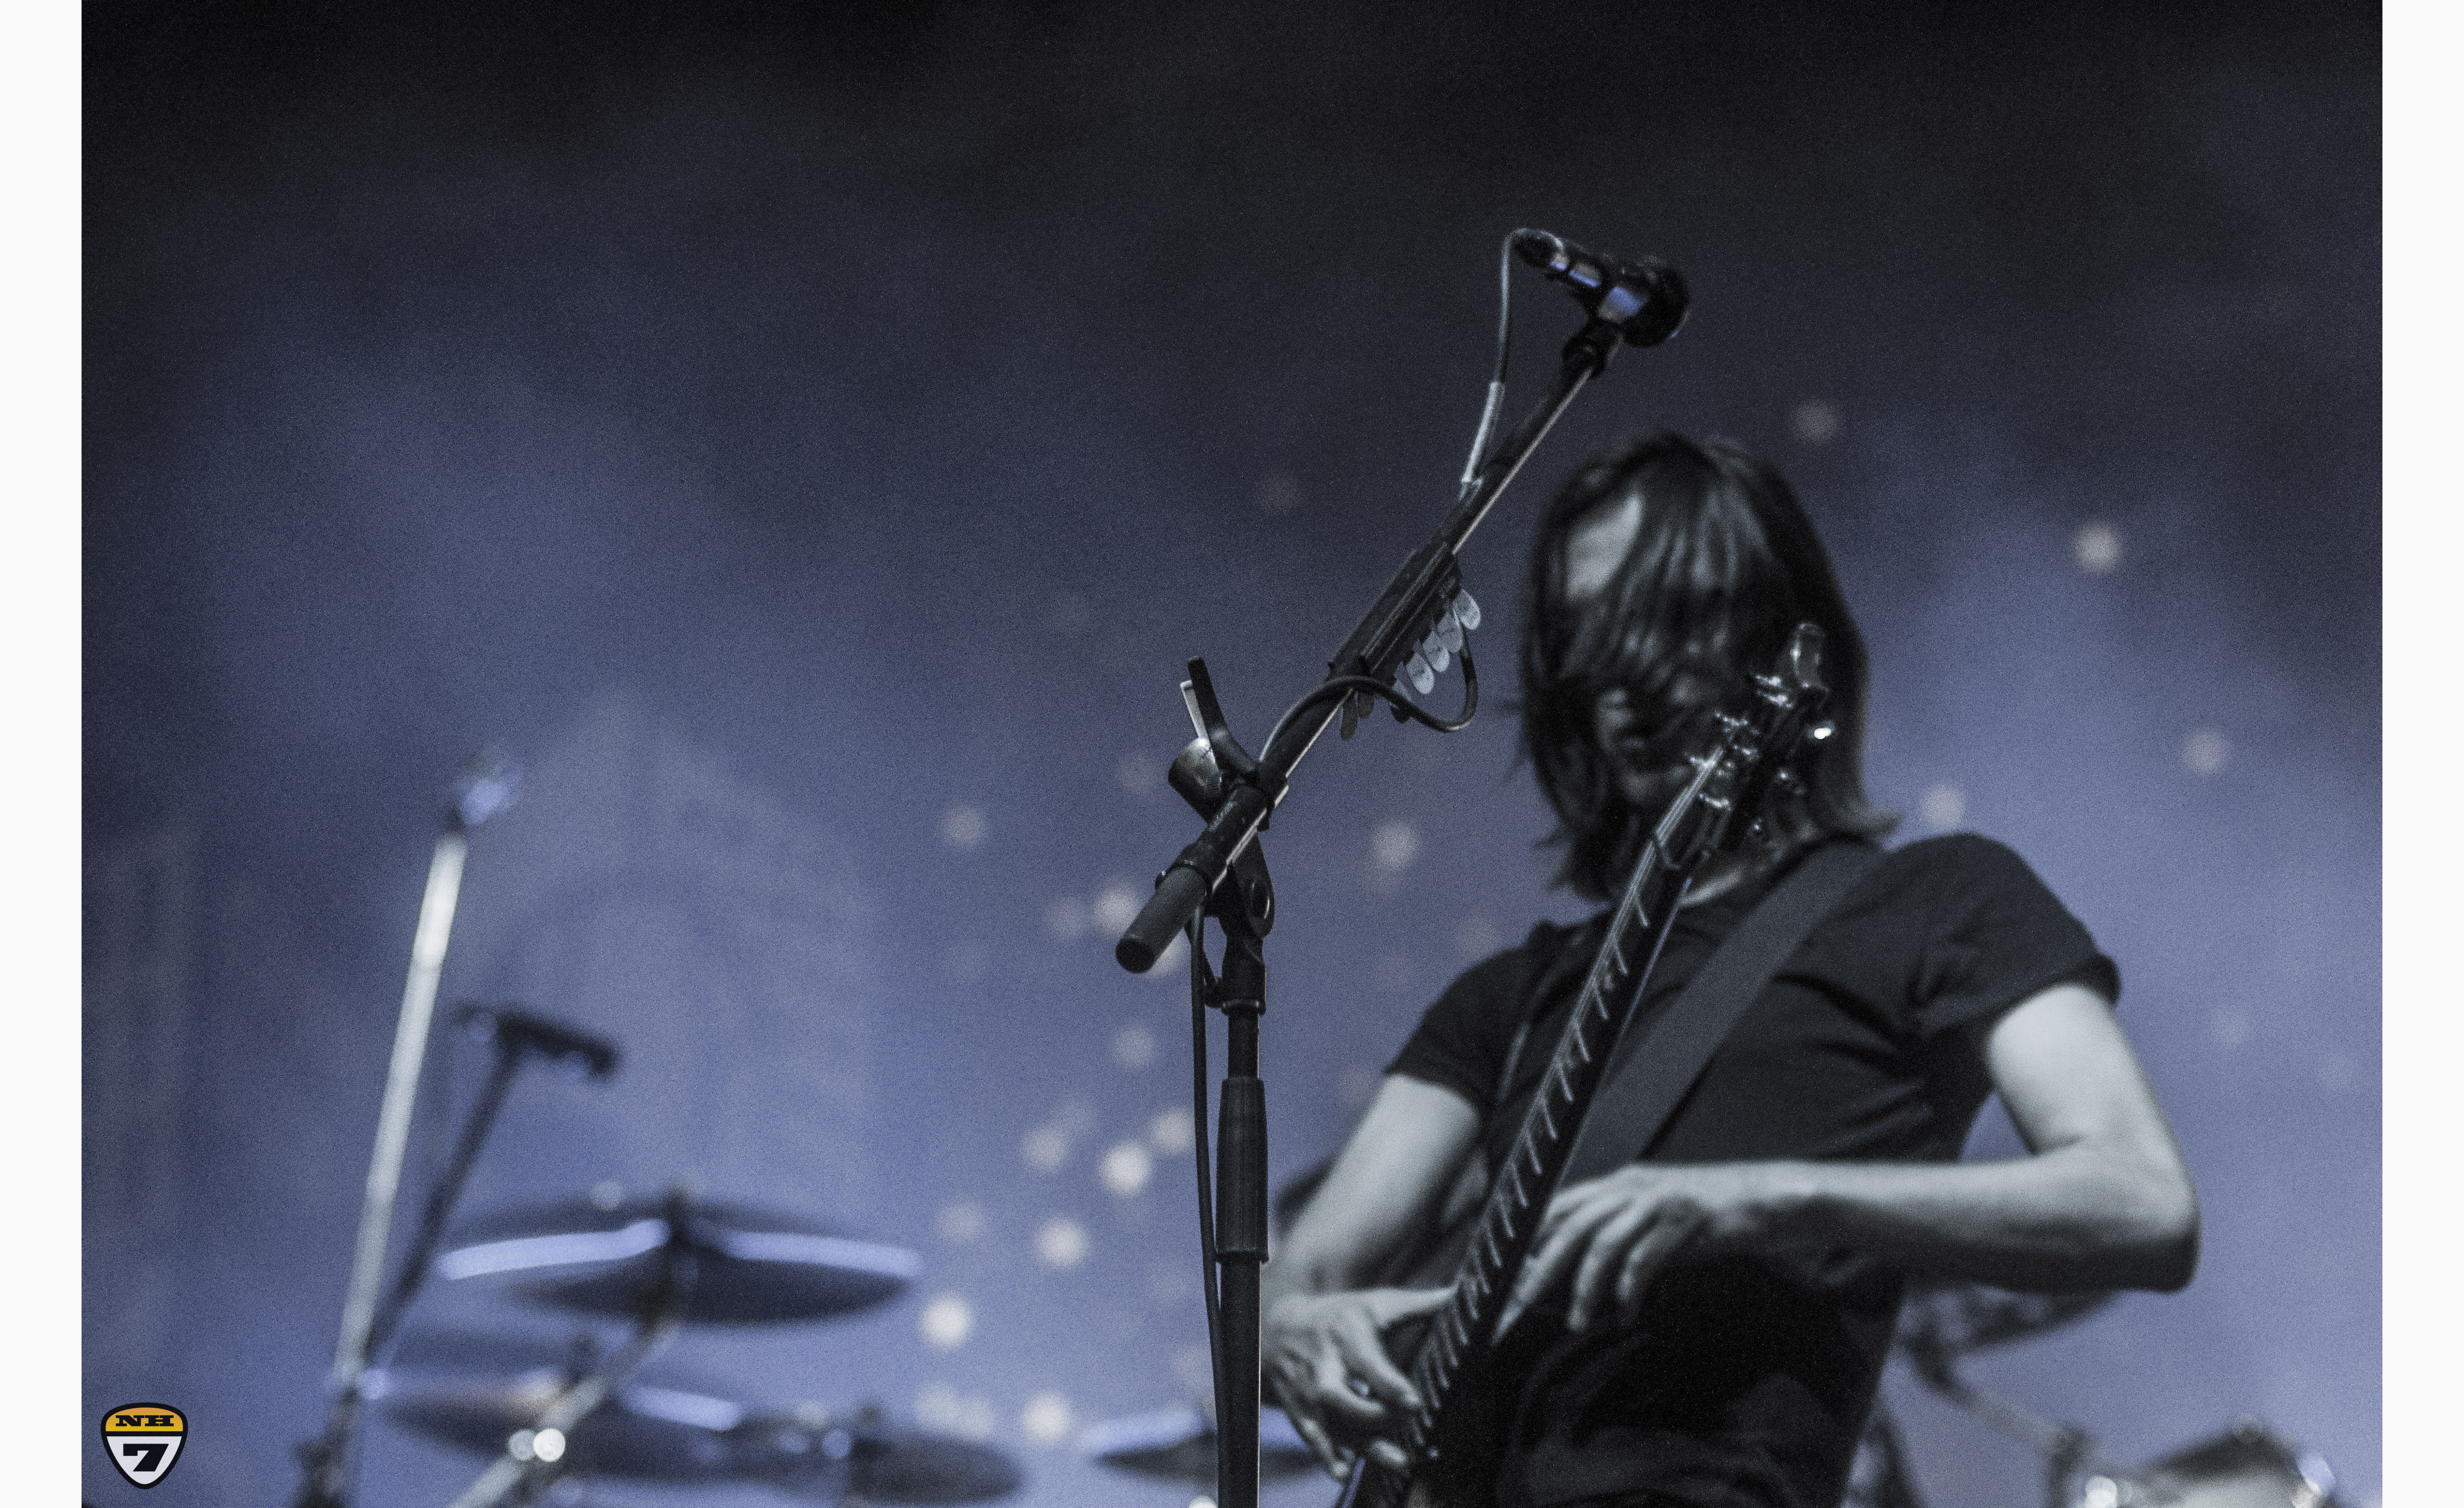  Steven Wilson performance on Day 2 of Bacardi NH7 Weekender Pune. Photo Credit - Chuck